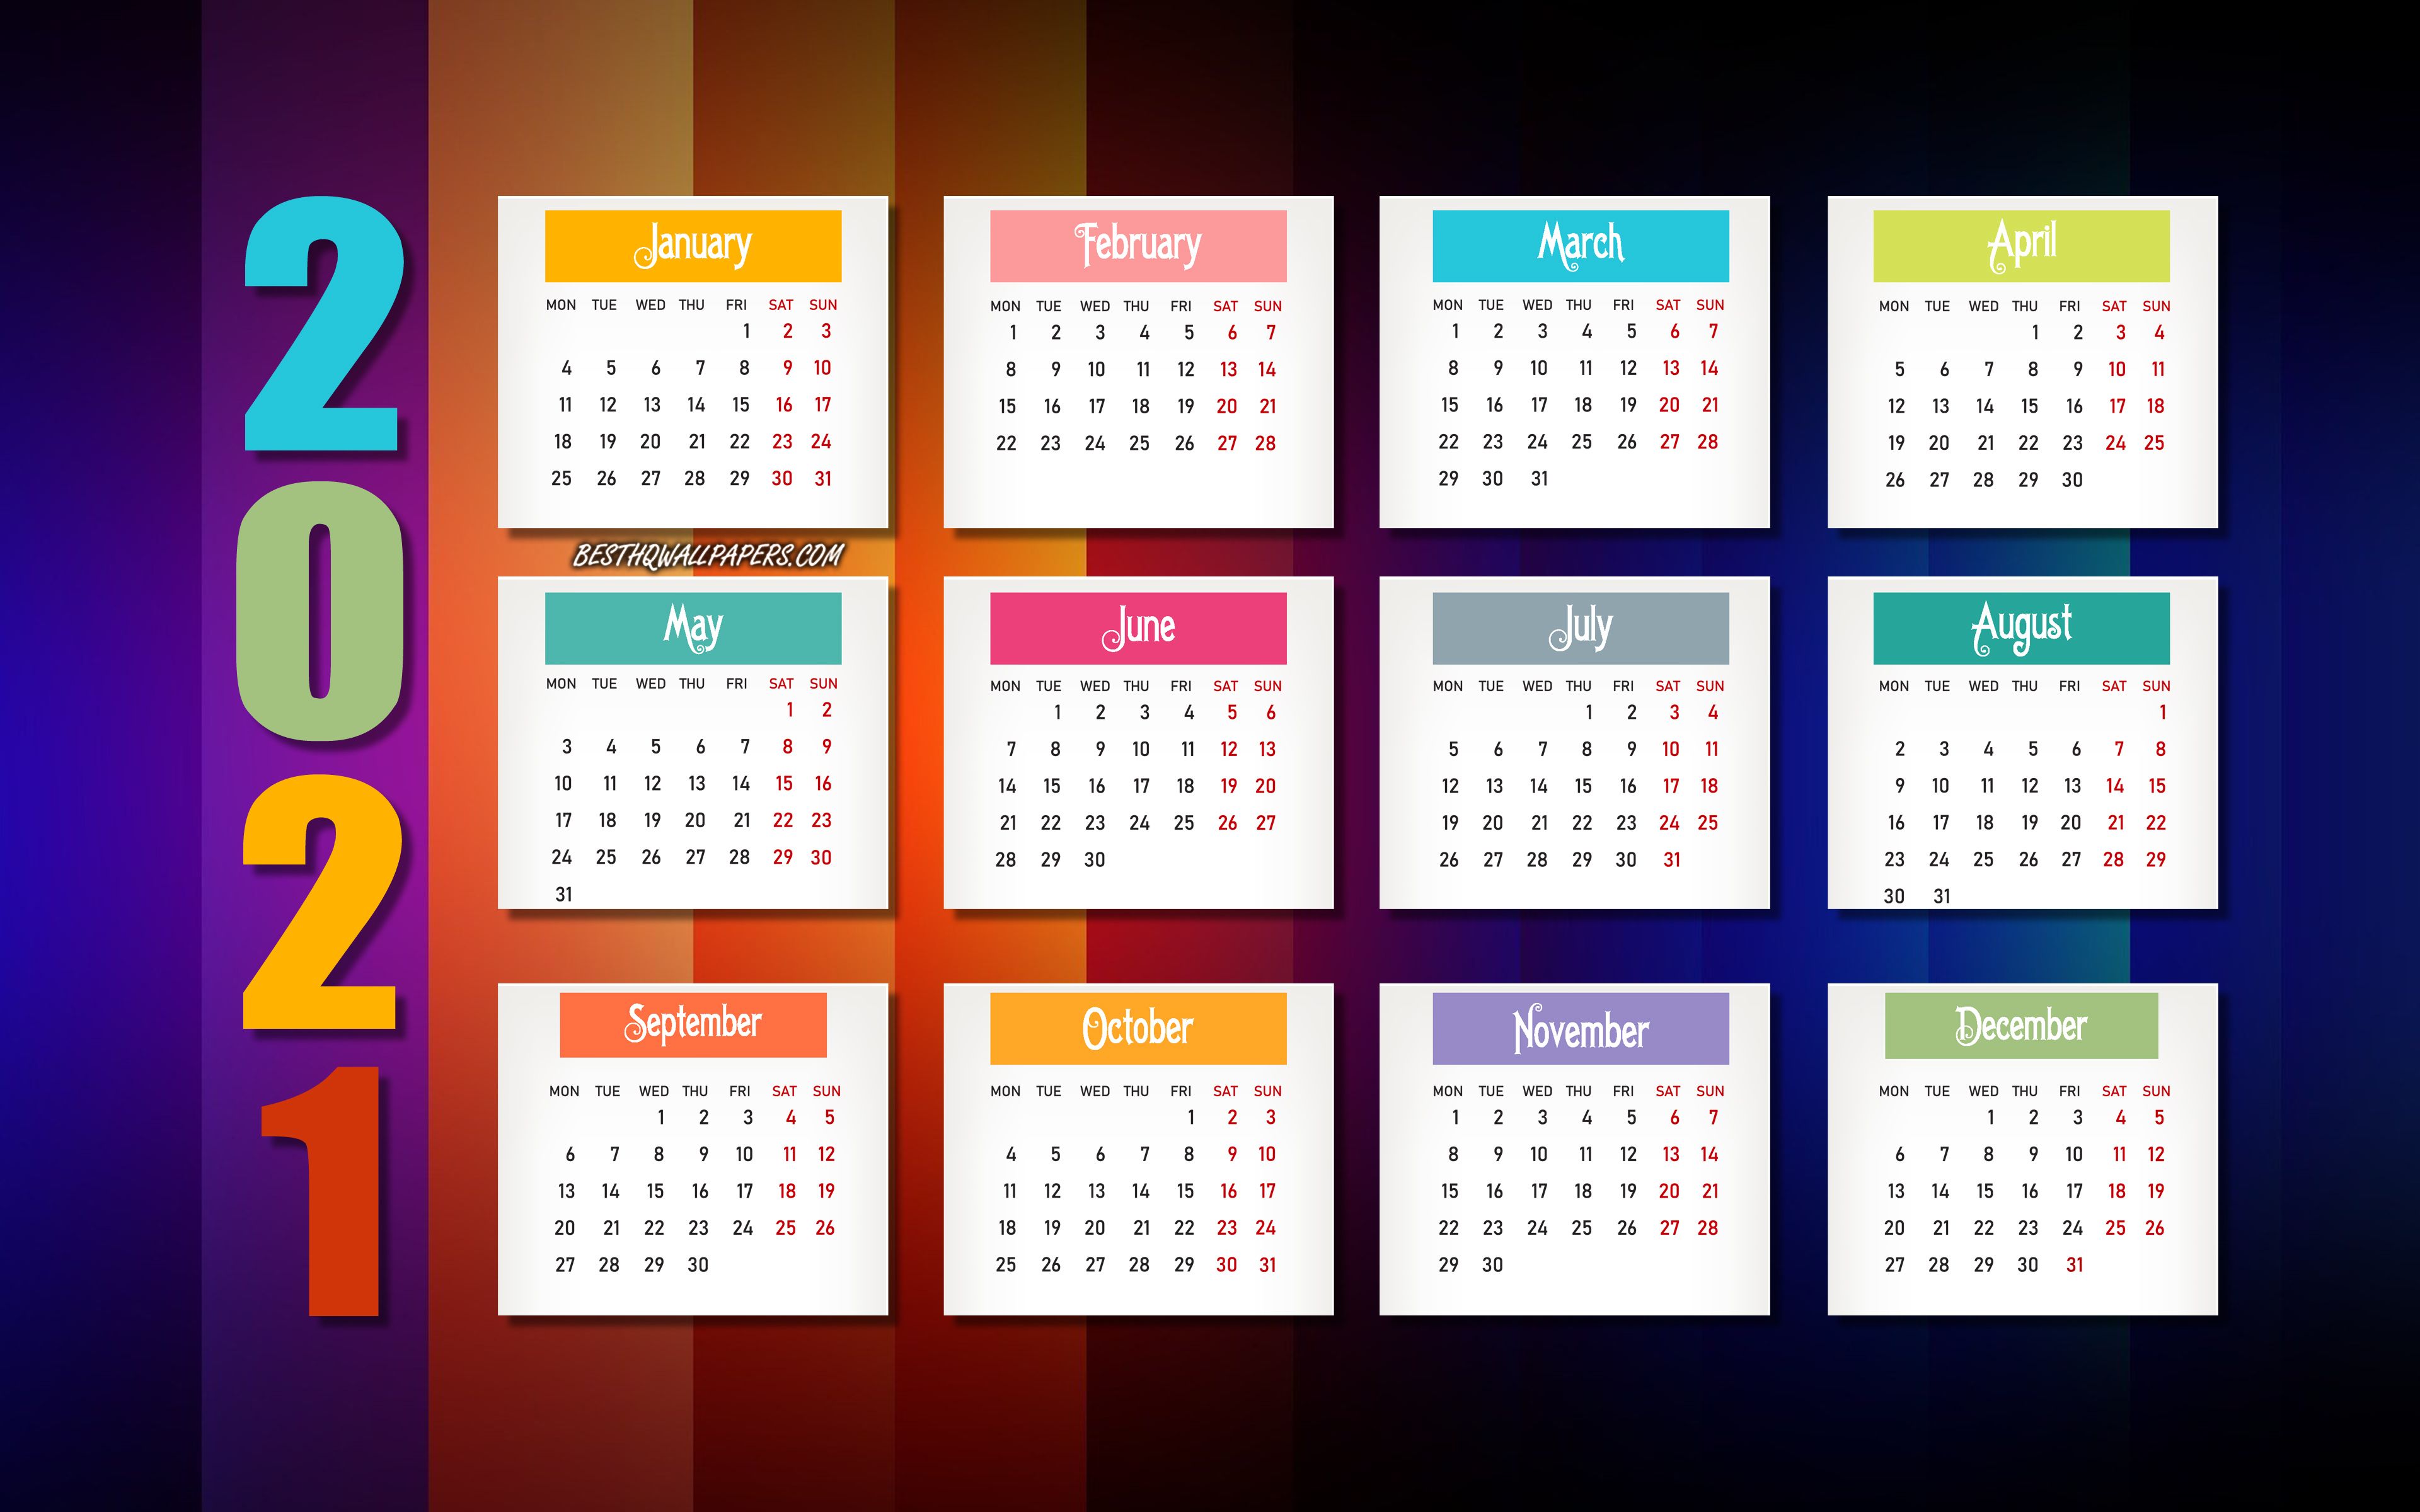 Download wallpaper 2021 Abstract Calendar, colorful lines background, 2021 all months calendar, 2021 colorful paper elements, 2021 concepts, 2021 New Year, 2021 Calendar for desktop with resolution 3840x2400. High Quality HD picture wallpaper